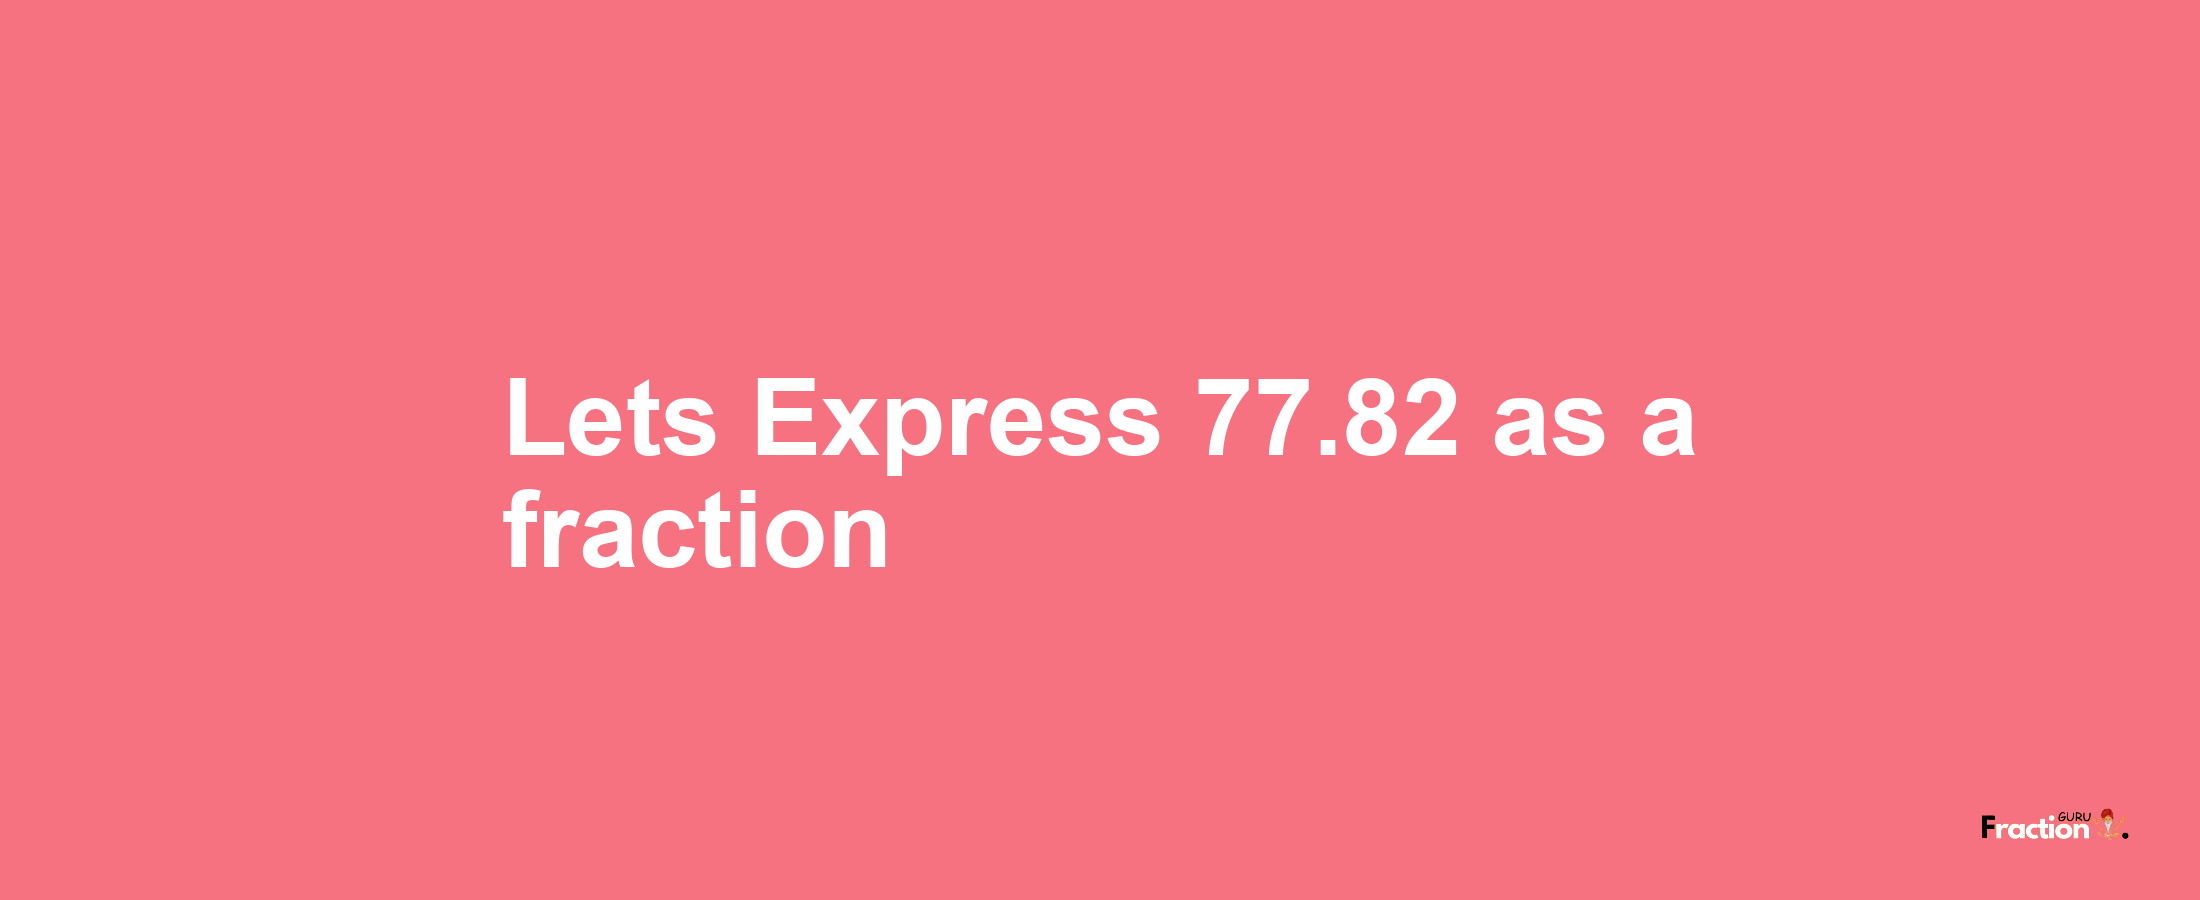 Lets Express 77.82 as afraction